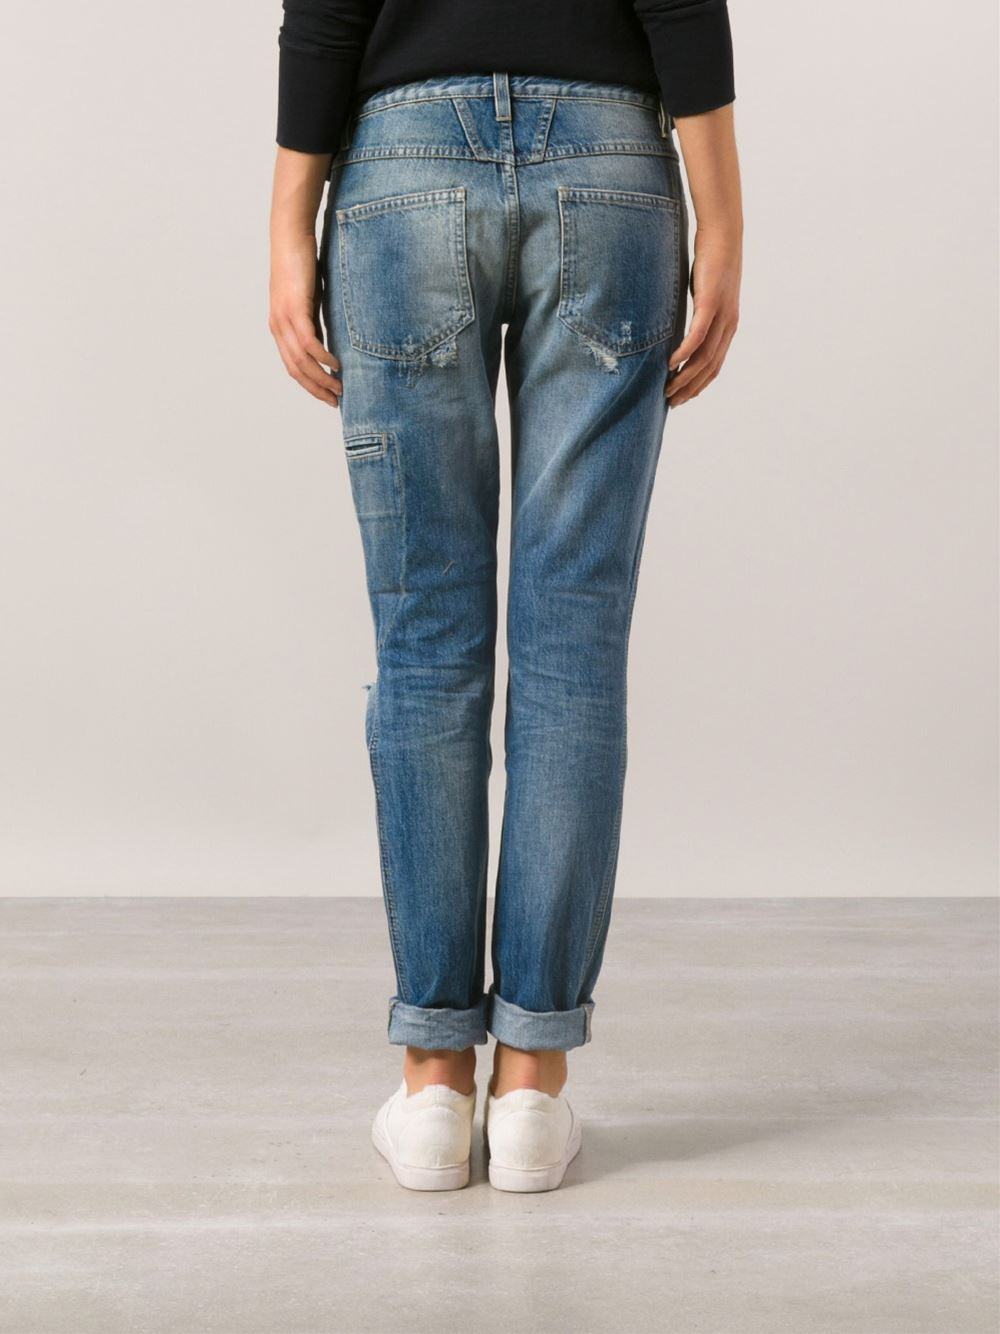 Lyst - Closed 'Worker-X' Jeans in Blue